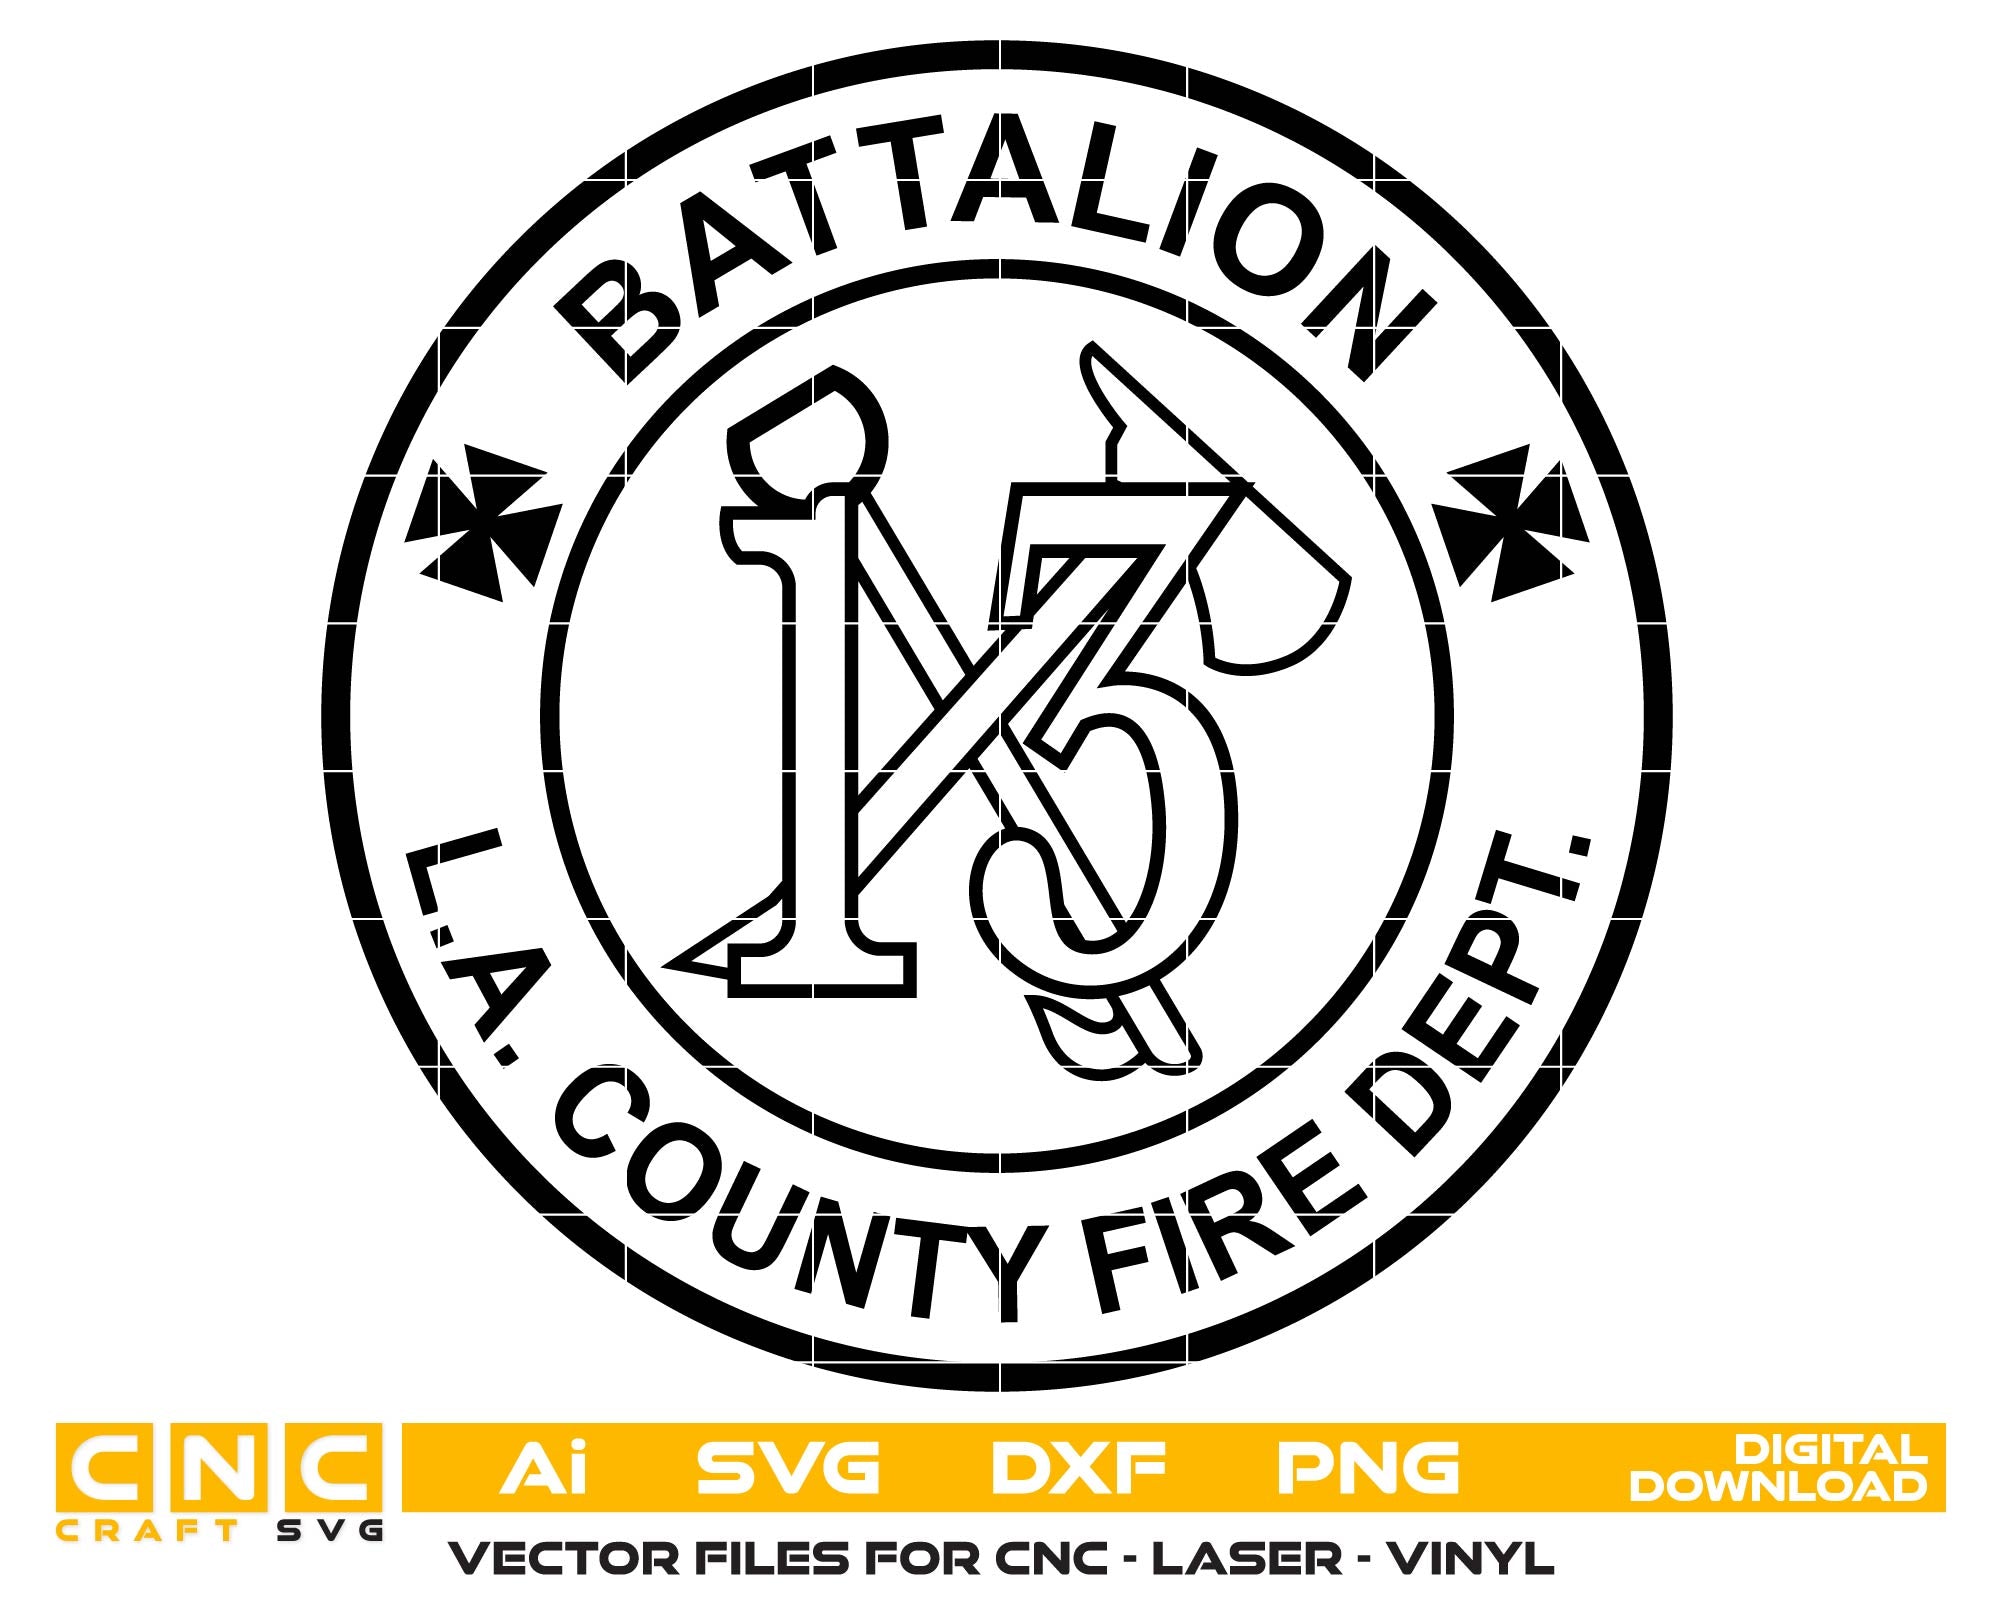 Los Angeles County Fire Department Vector Art, Ai,SVG, DXF, PNG, Digital Files